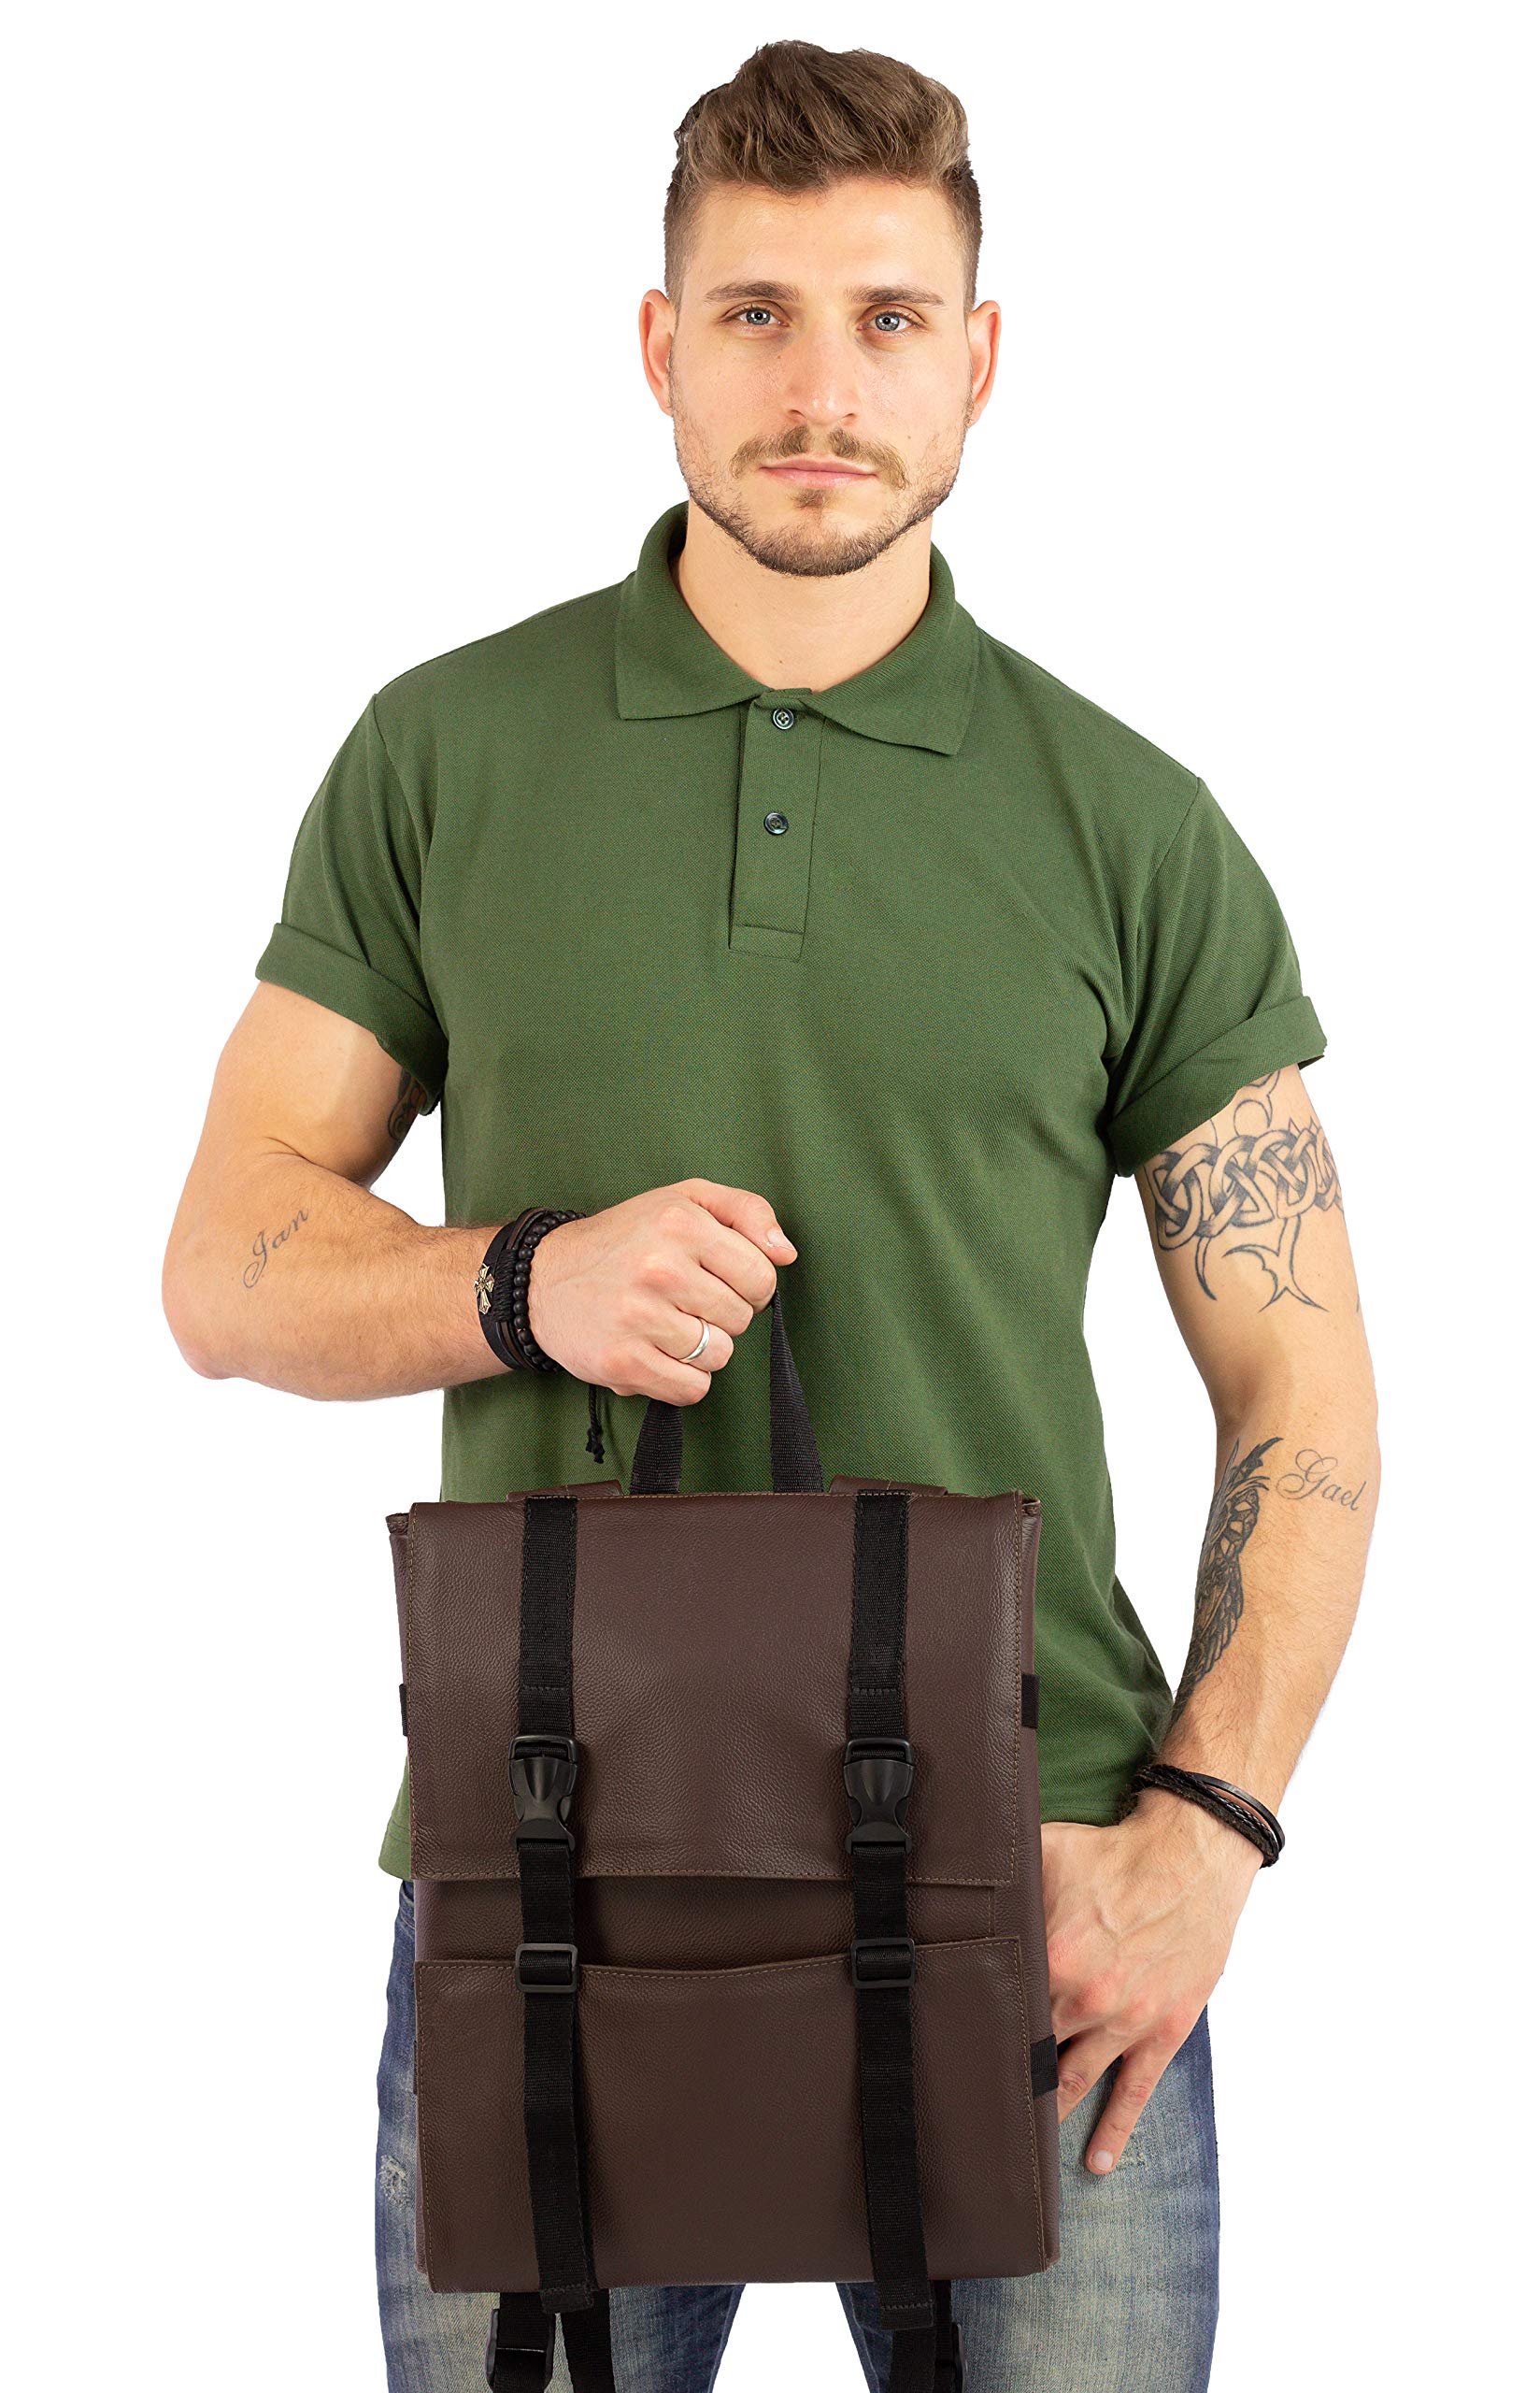 Under NY Sky Knife Bag - Brown Real Leather - 13 Knife Slots, 2 Zipped Pockets for Kitchen Utensils, Large Pocket for Tablets & Notebooks - Expandable - Tool Storage Bag Style for Chefs, Cooks, BBQ